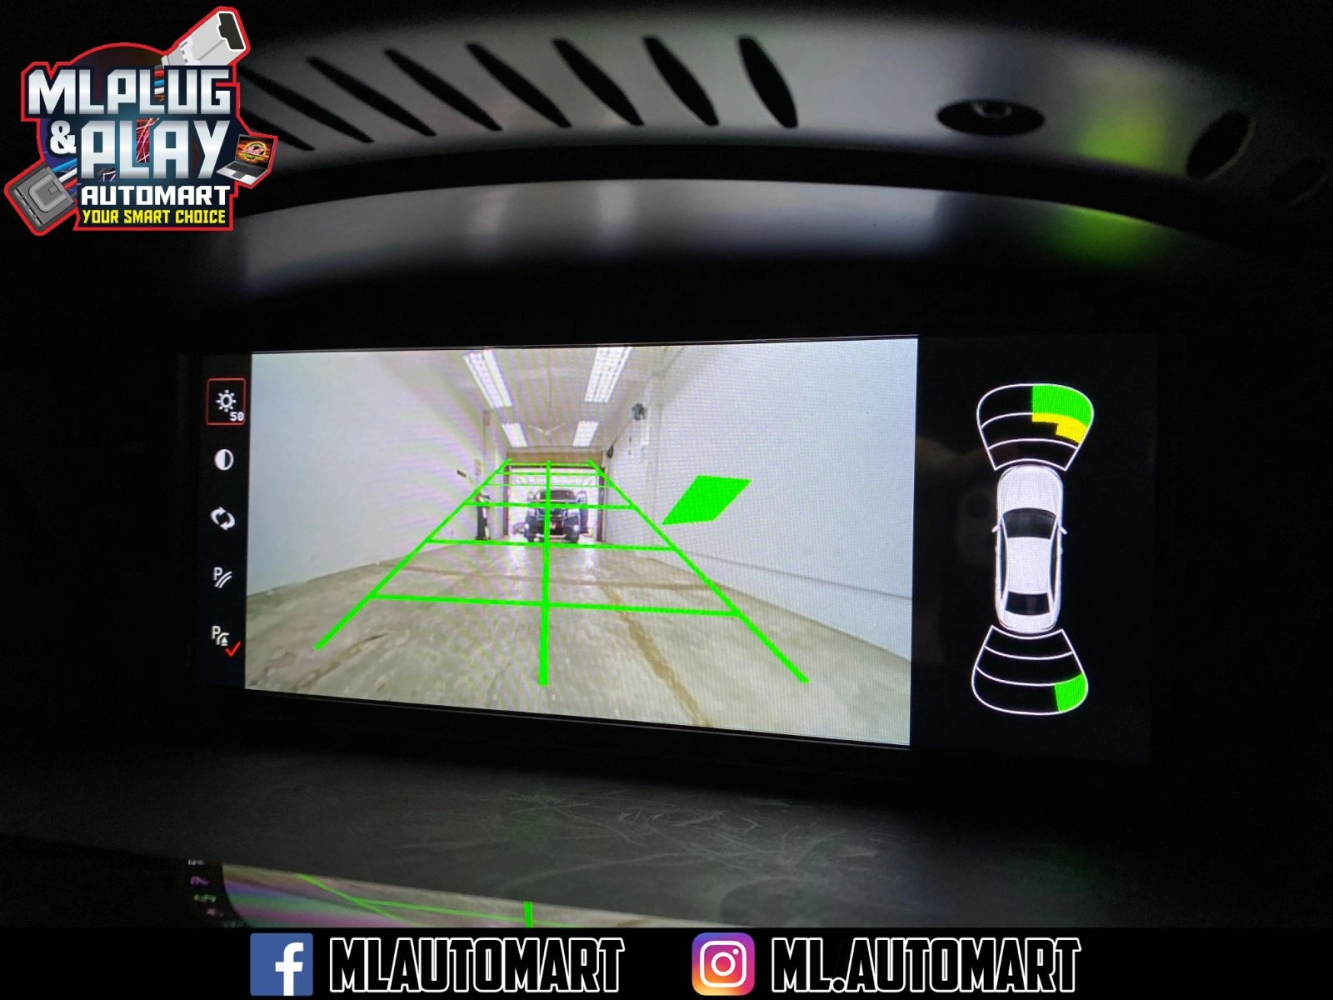 BMW 6 Series E63 Android Monitor